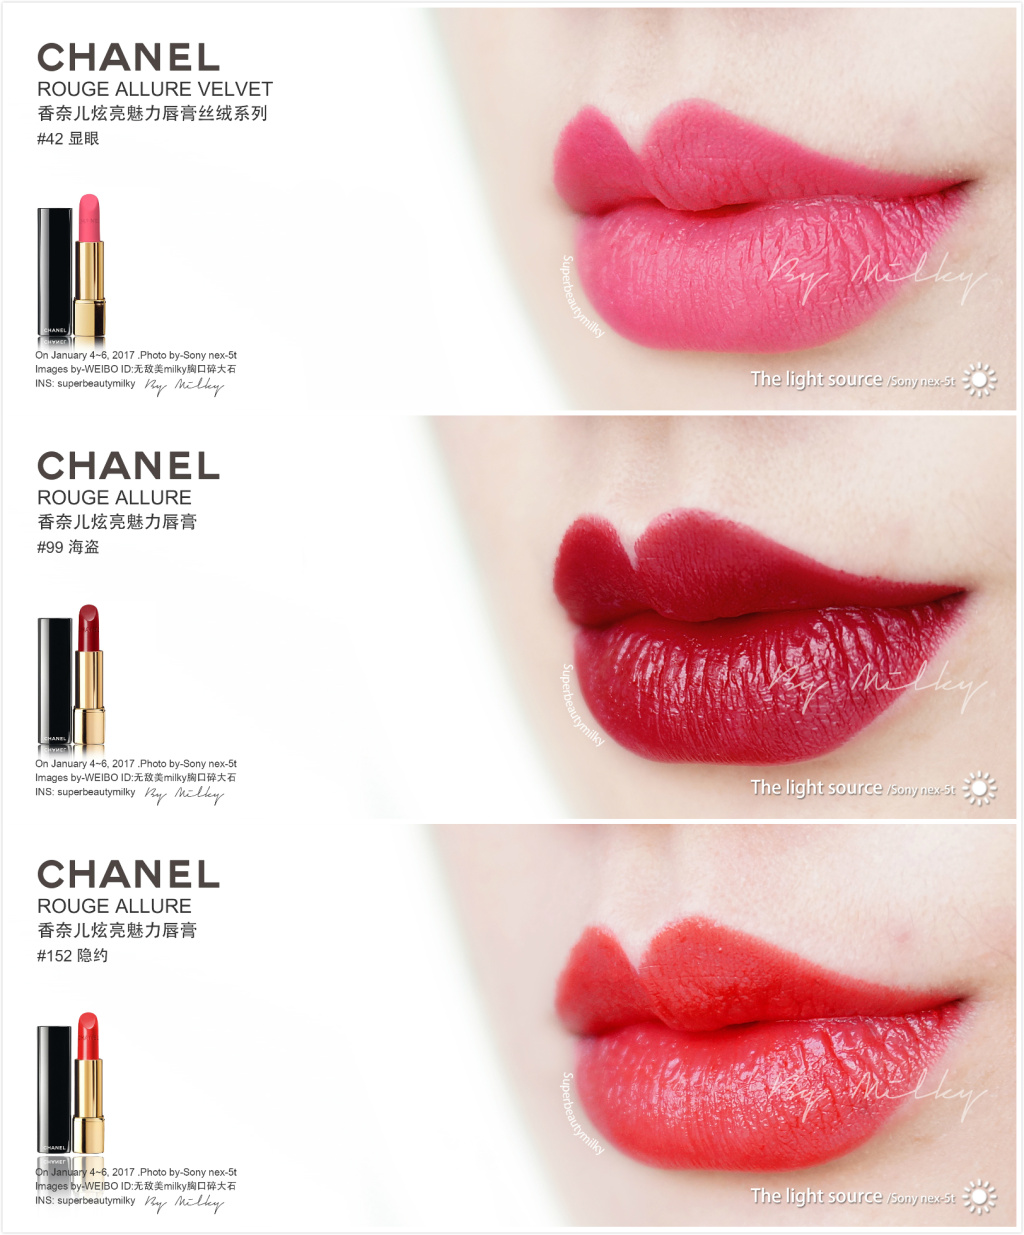 CHANEL ROUGE ALLURE/香奈儿炫亮魅力唇膏99/152 试色、CHANEL ROUGE ALLURE VELVET/香奈儿炫亮魅力唇膏丝绒 ...